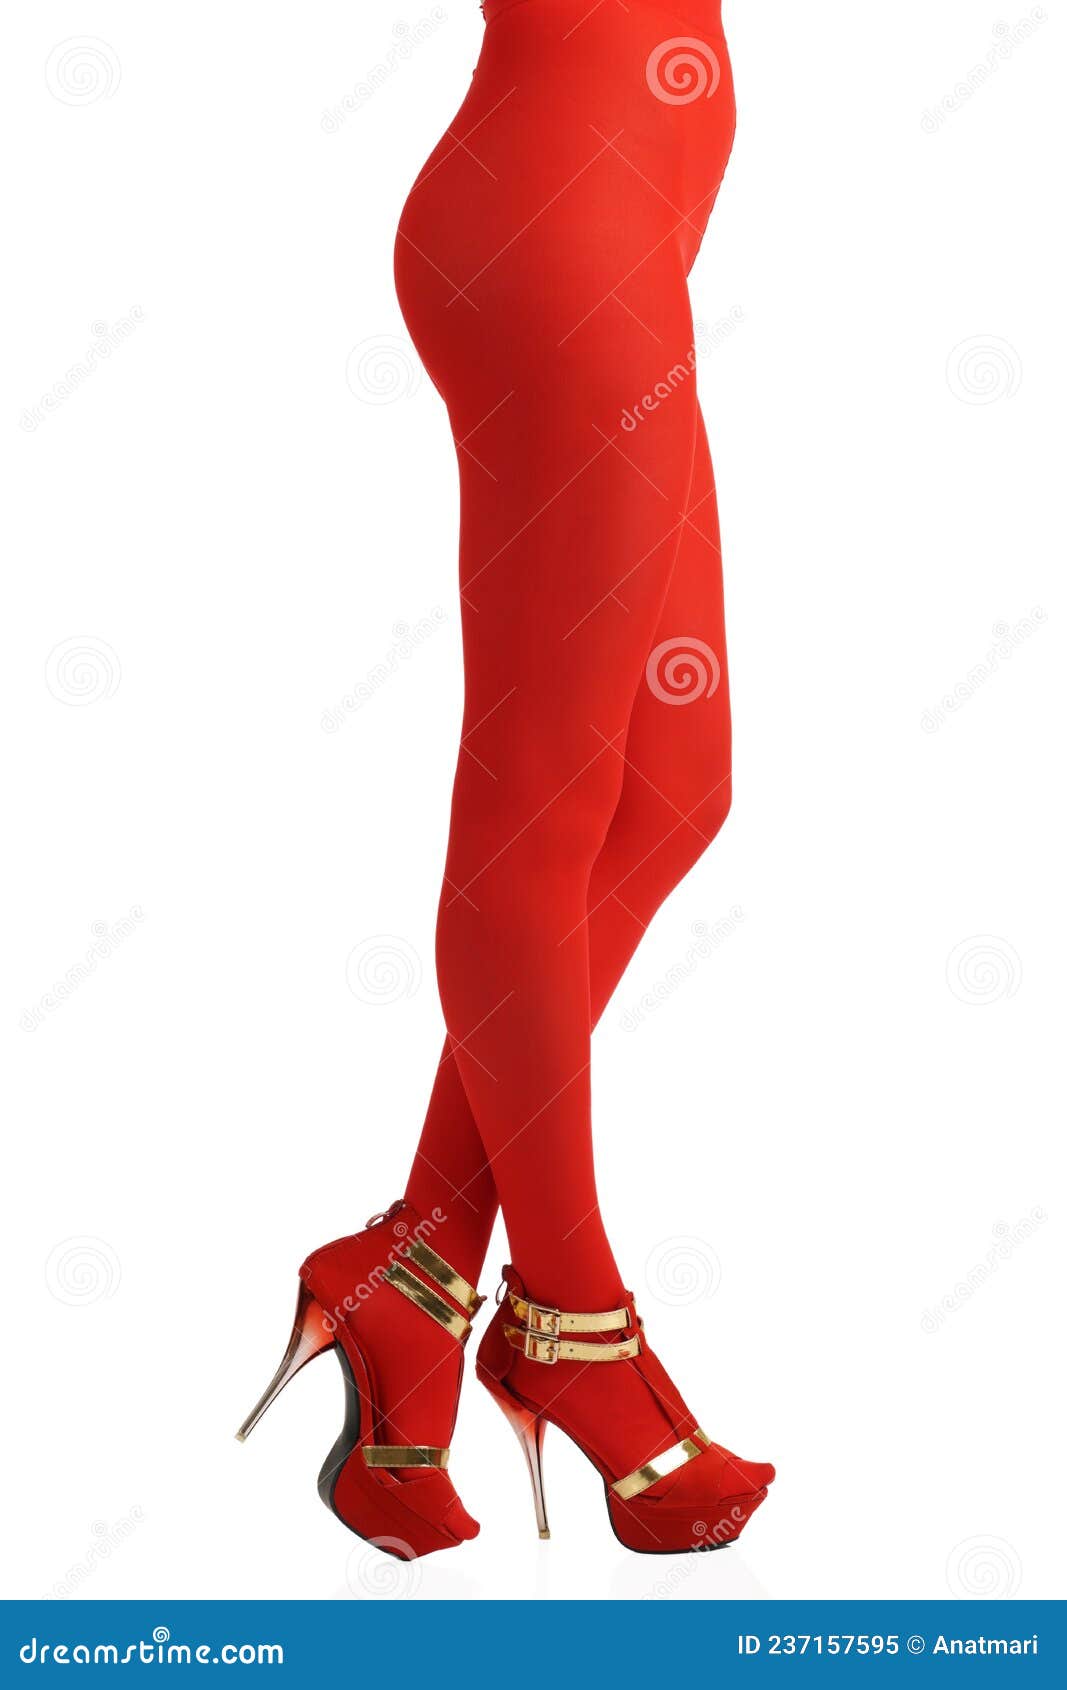 View of Slim Woman Body Lower Part Wearing Red Tights and High-heeled Shoes  Stock Image - Image of erotic, highheels: 237157595